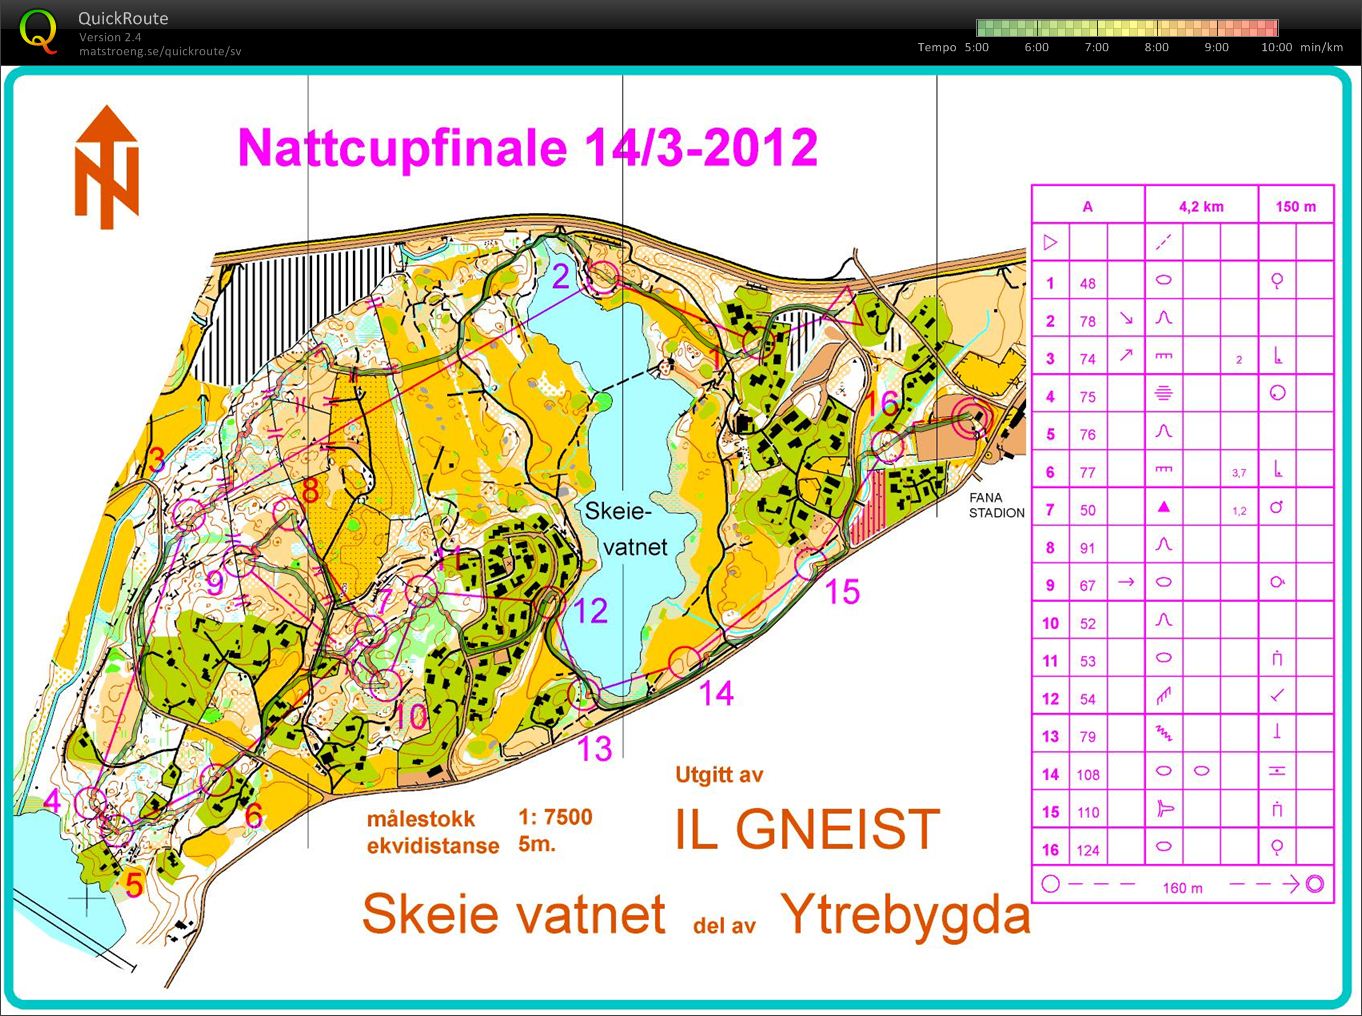 Nattcup, finale 2012 (14-03-2012)